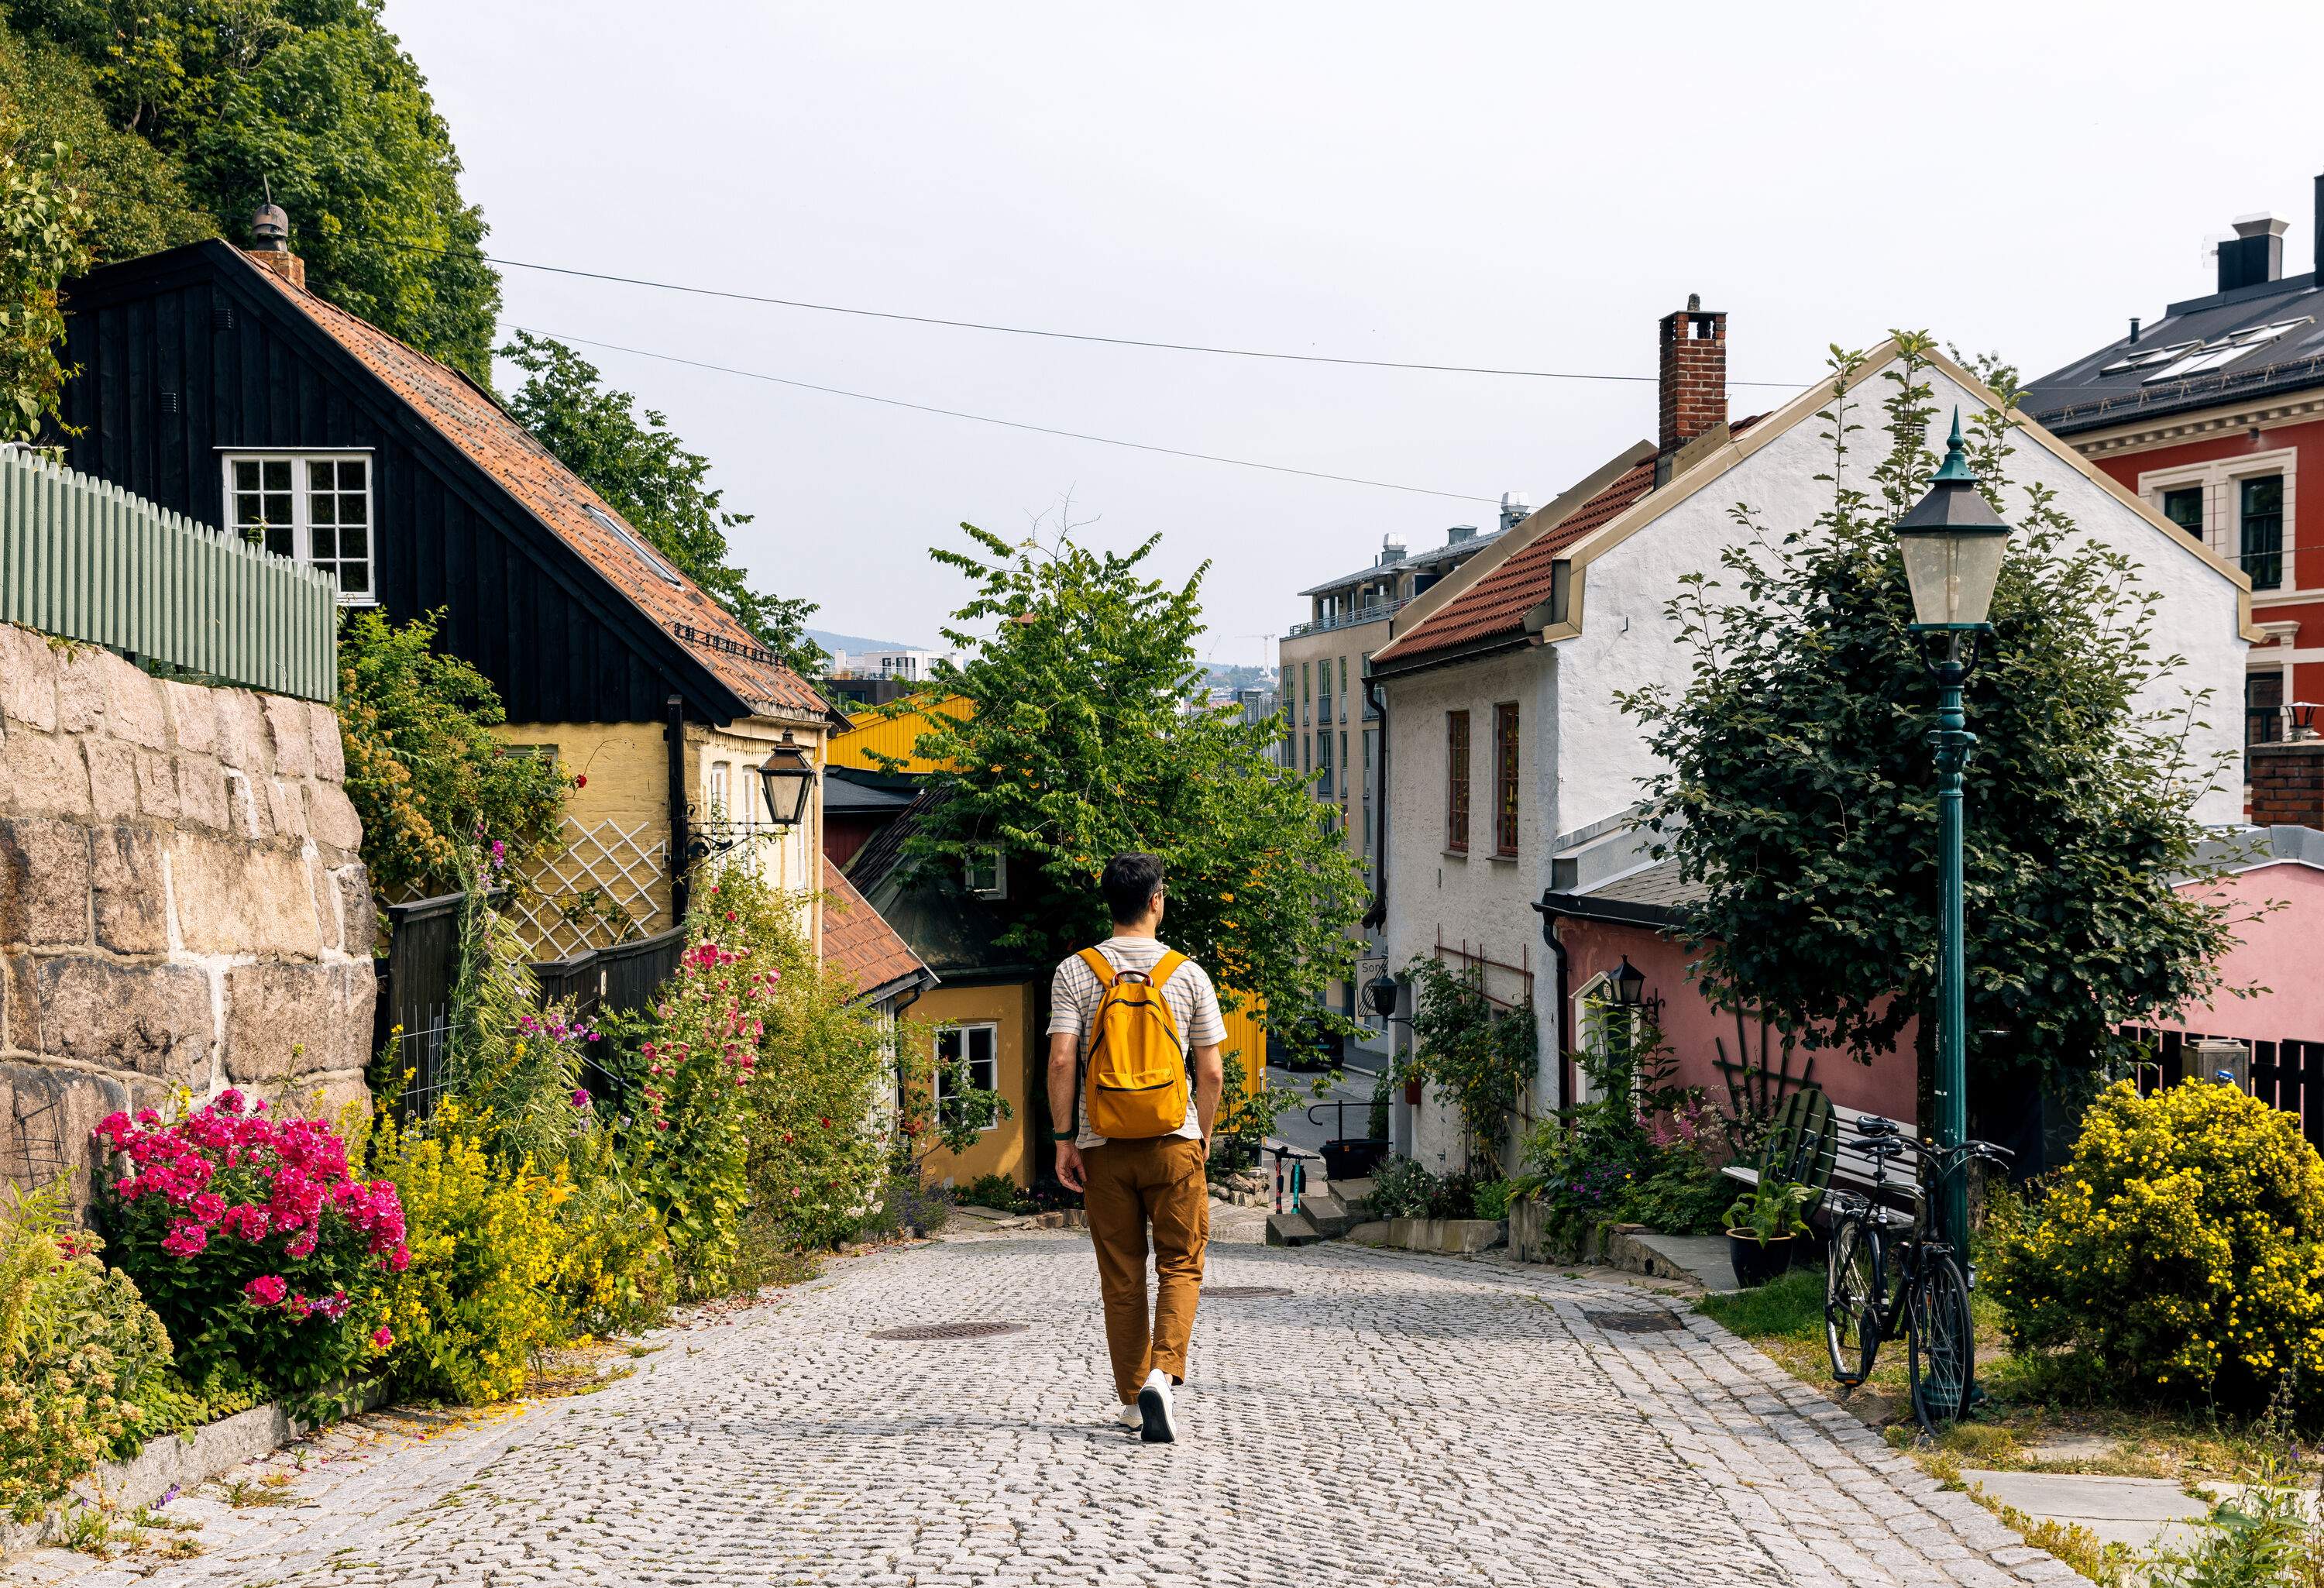 A man wanders on a cobbled street between compact houses.